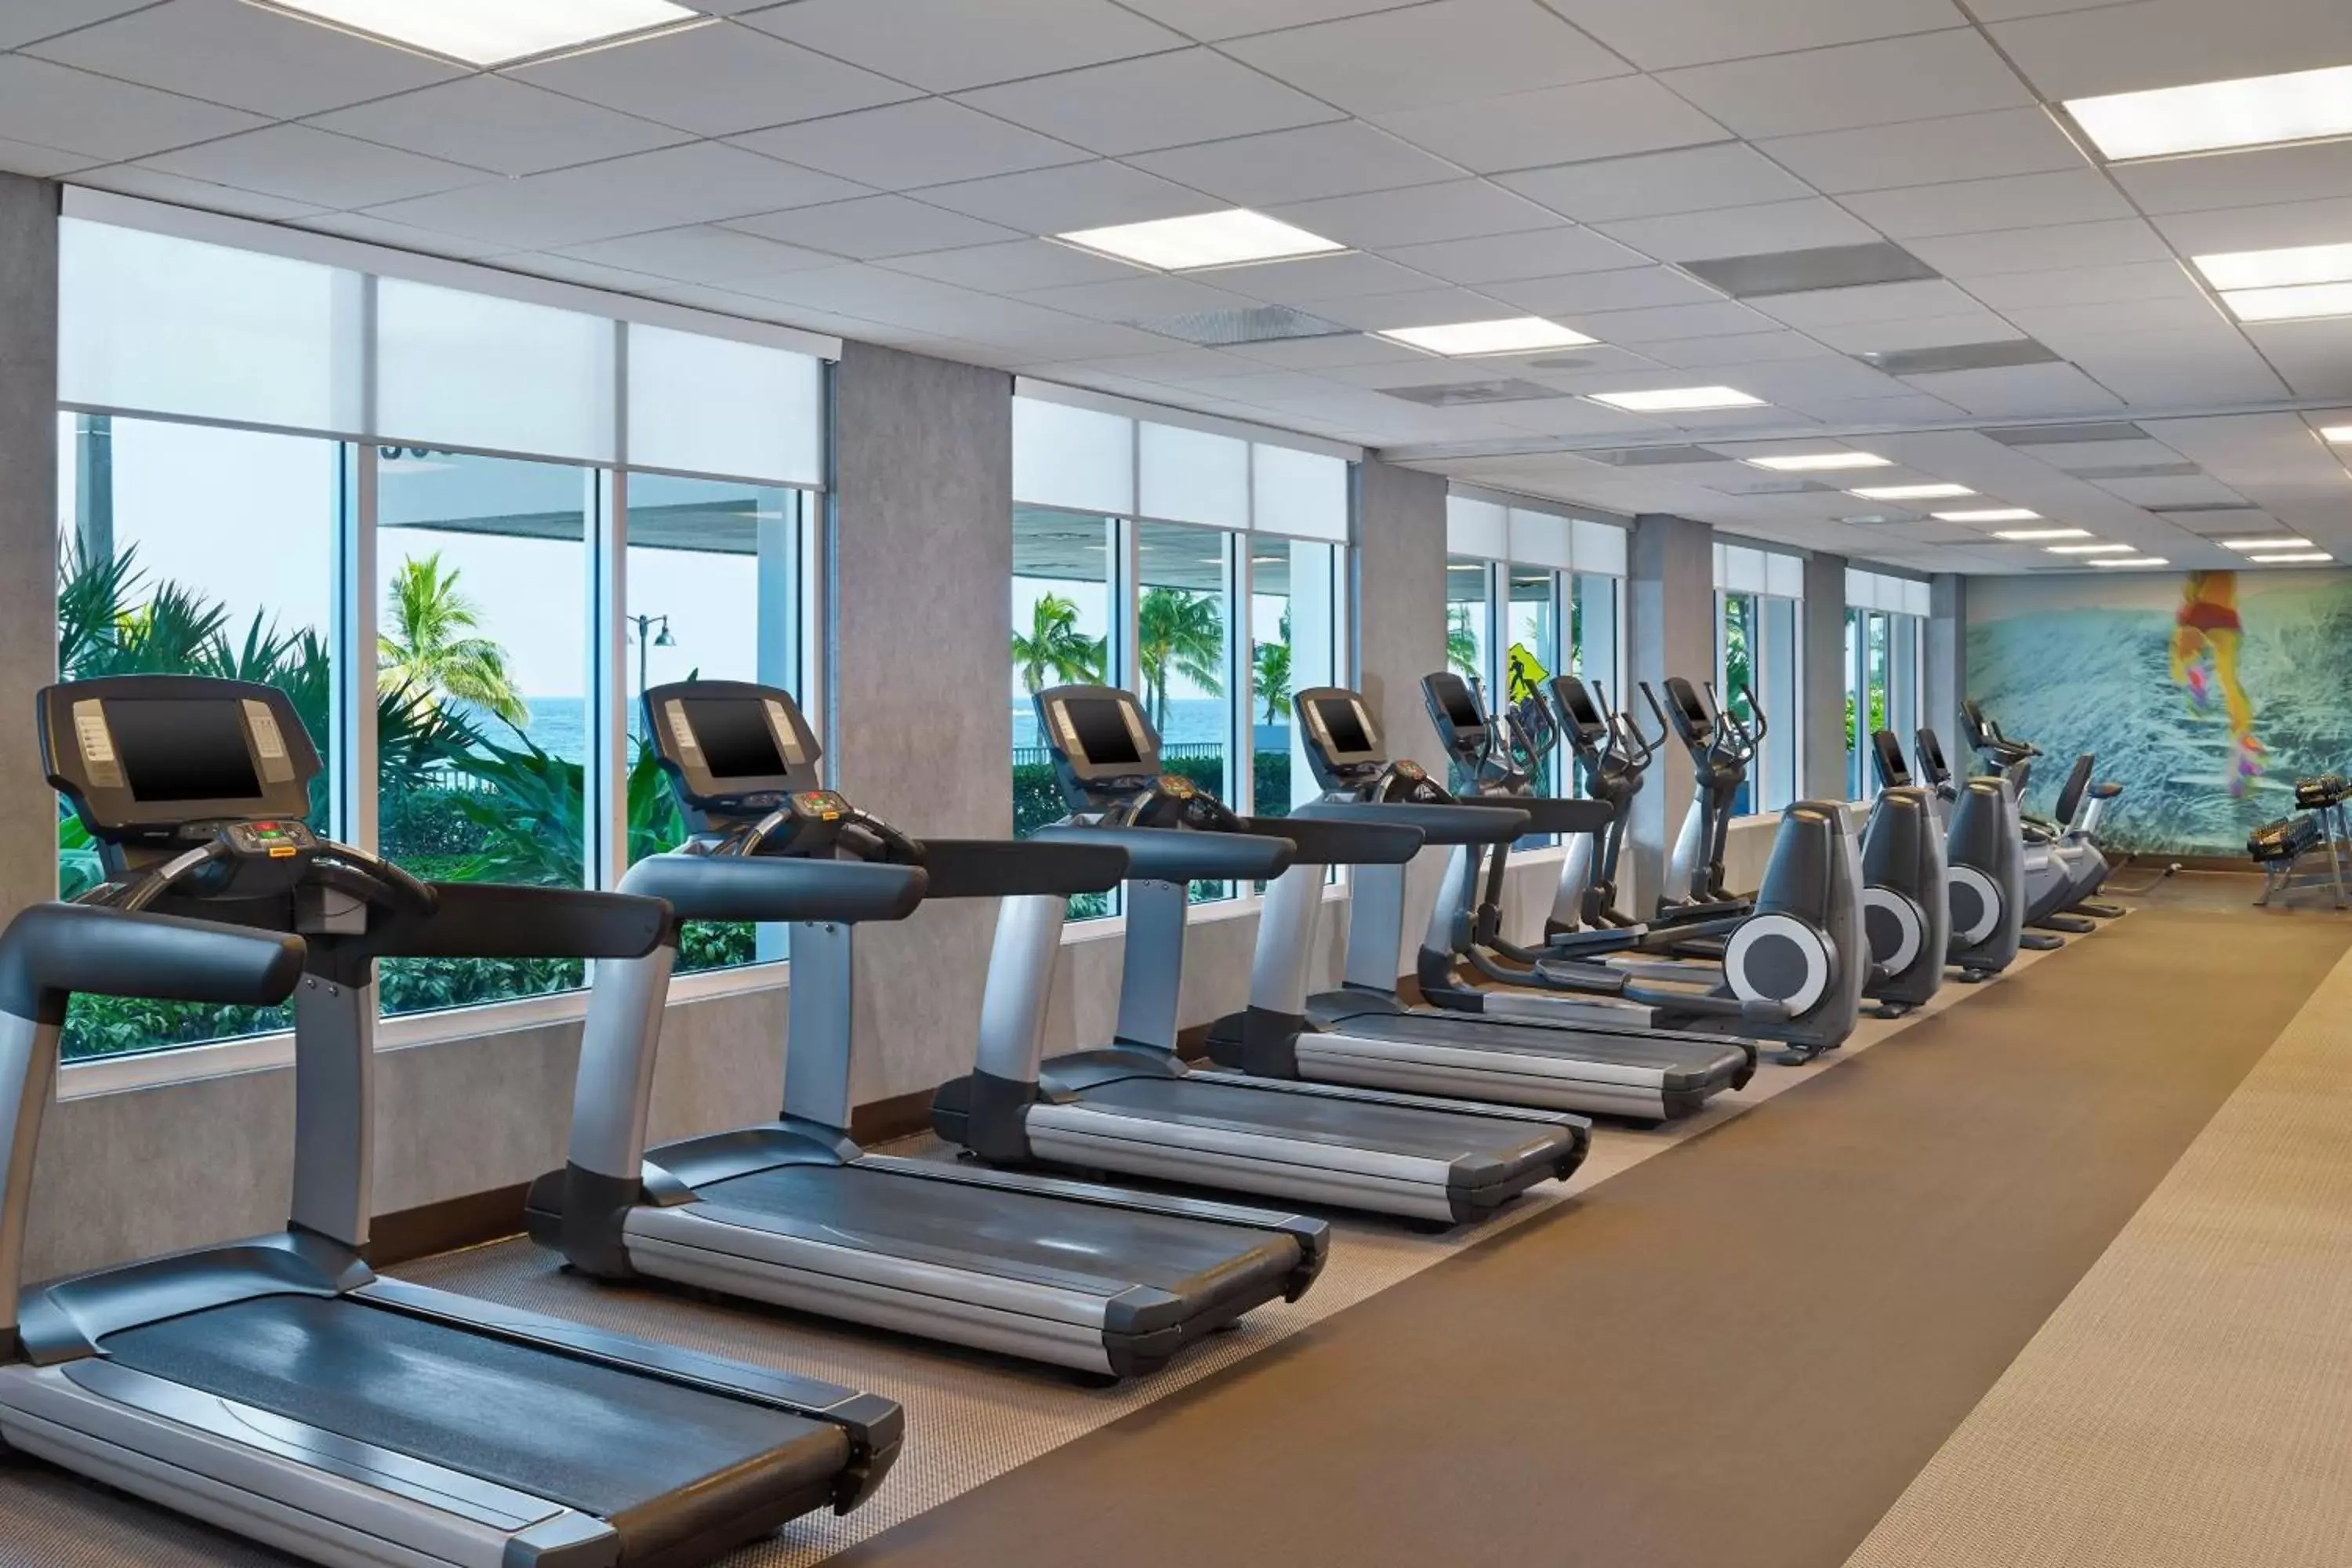 Fitness centre/facilities, Fitness Center/Facilities in The Westin Fort Lauderdale Beach Resort